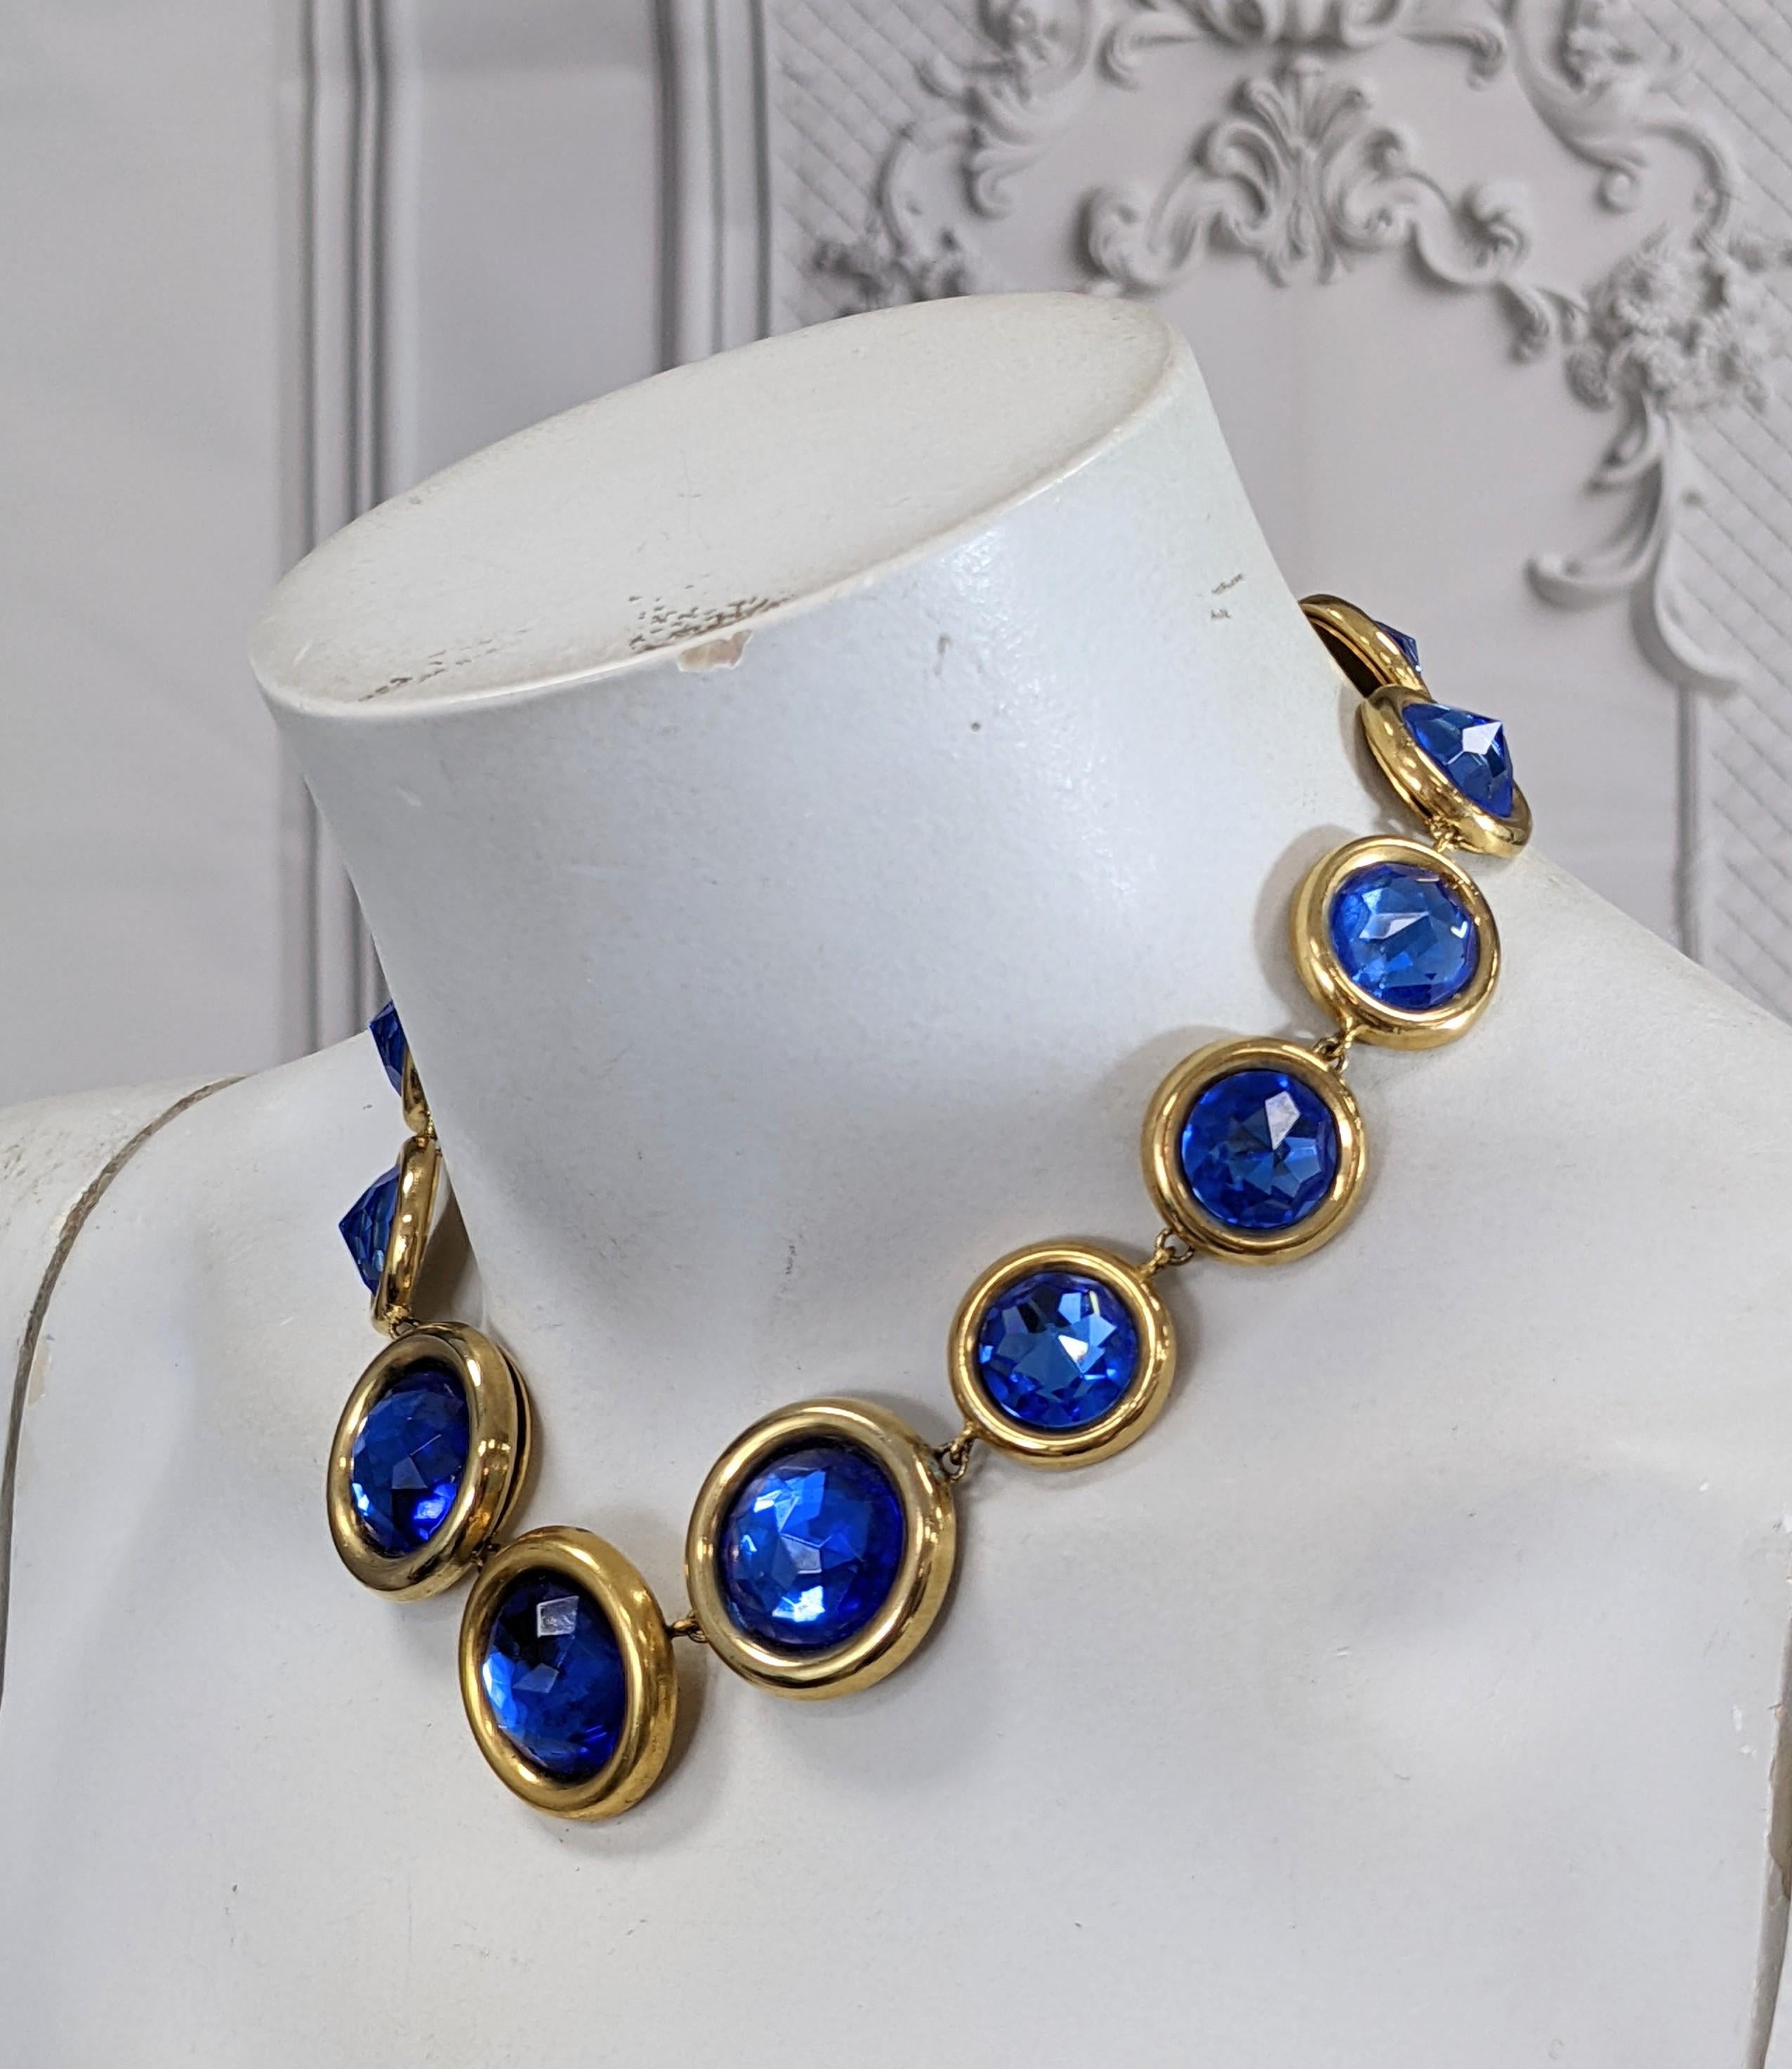 Givenchy Haute Couture Headlight Necklace, Provenance Bunny Mellon In Excellent Condition For Sale In New York, NY